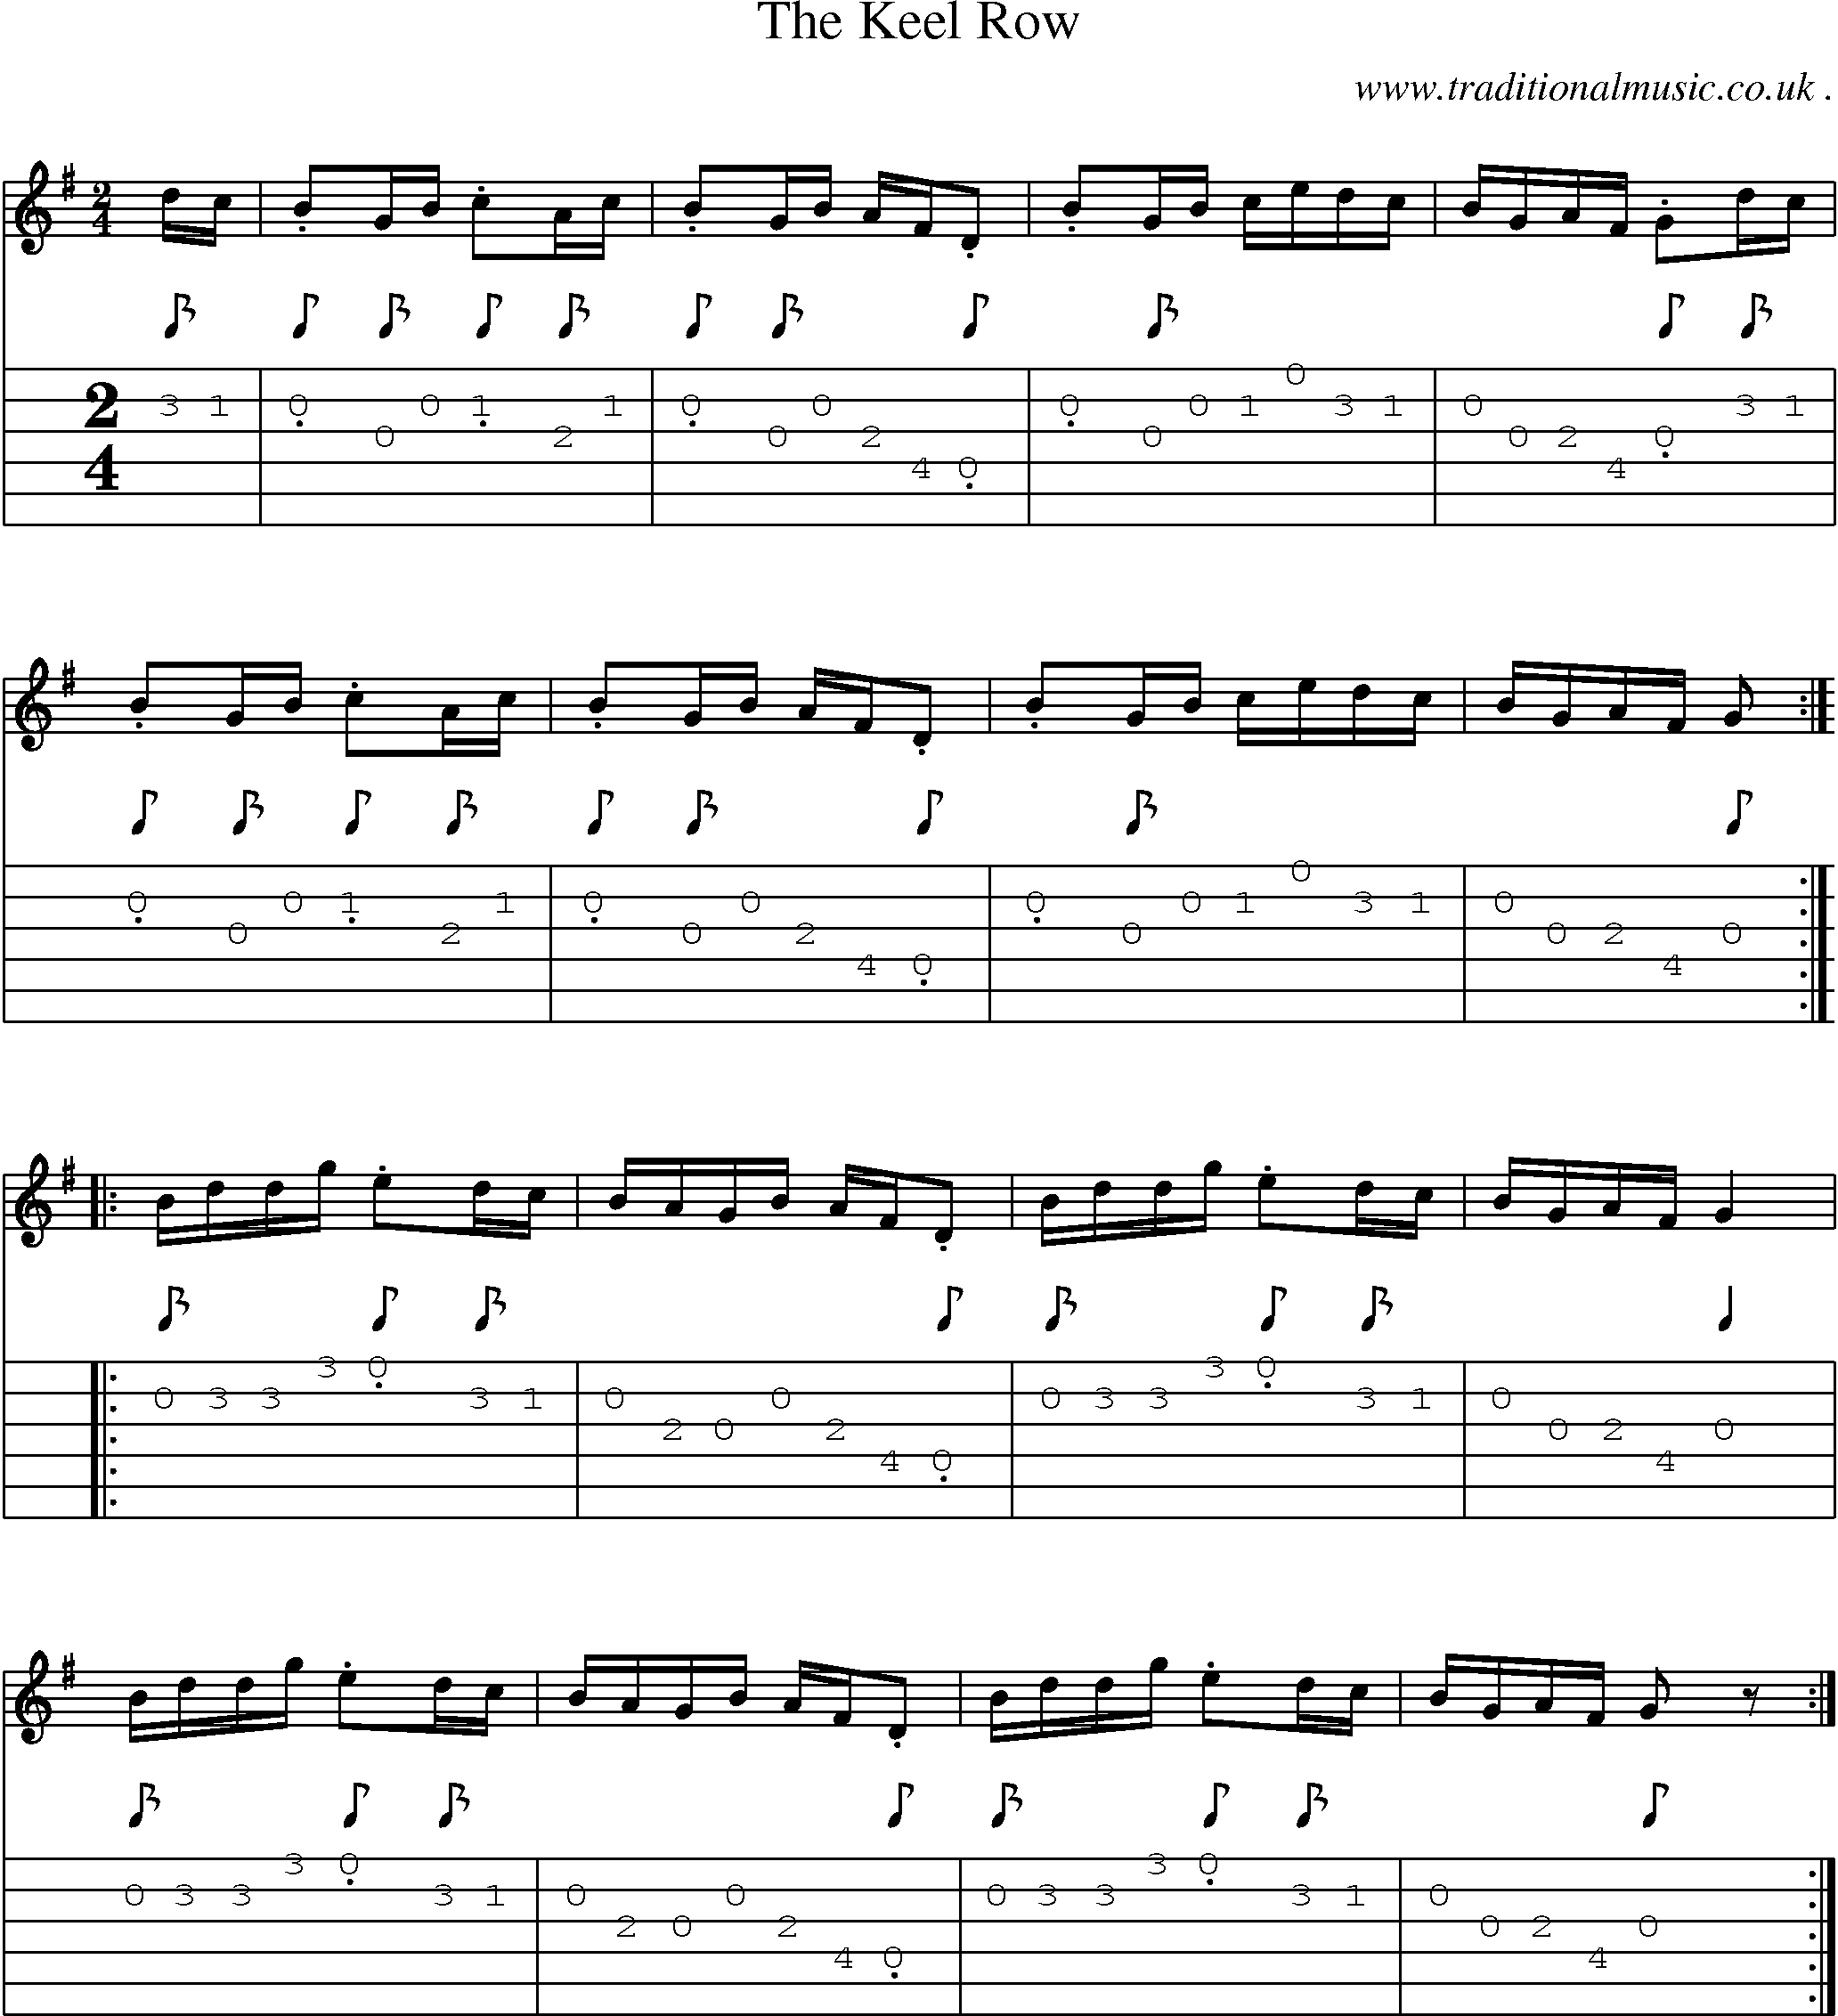 Sheet-Music and Guitar Tabs for The Keel Row